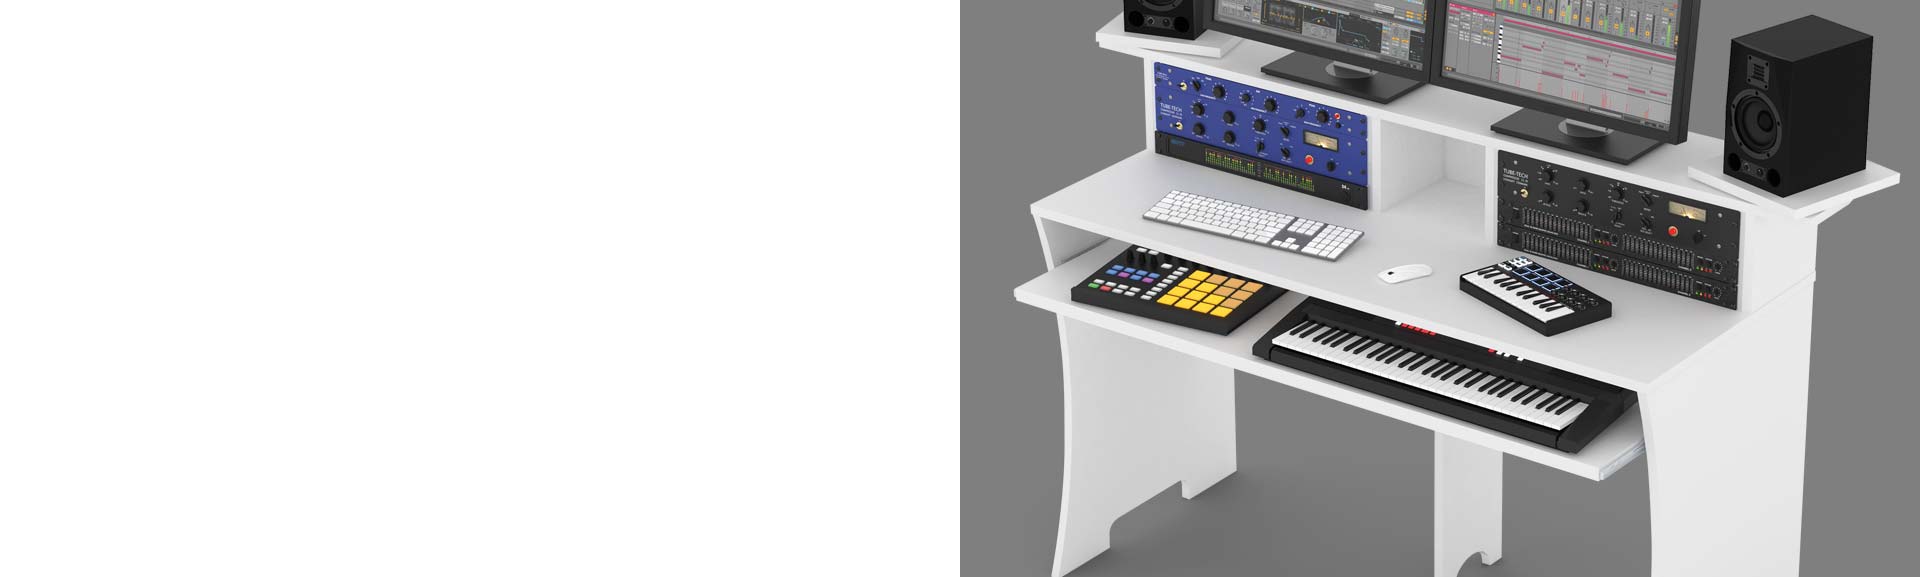 Glorious Workbench White / Furniture for DJs, Producers and Vinyl Lovers